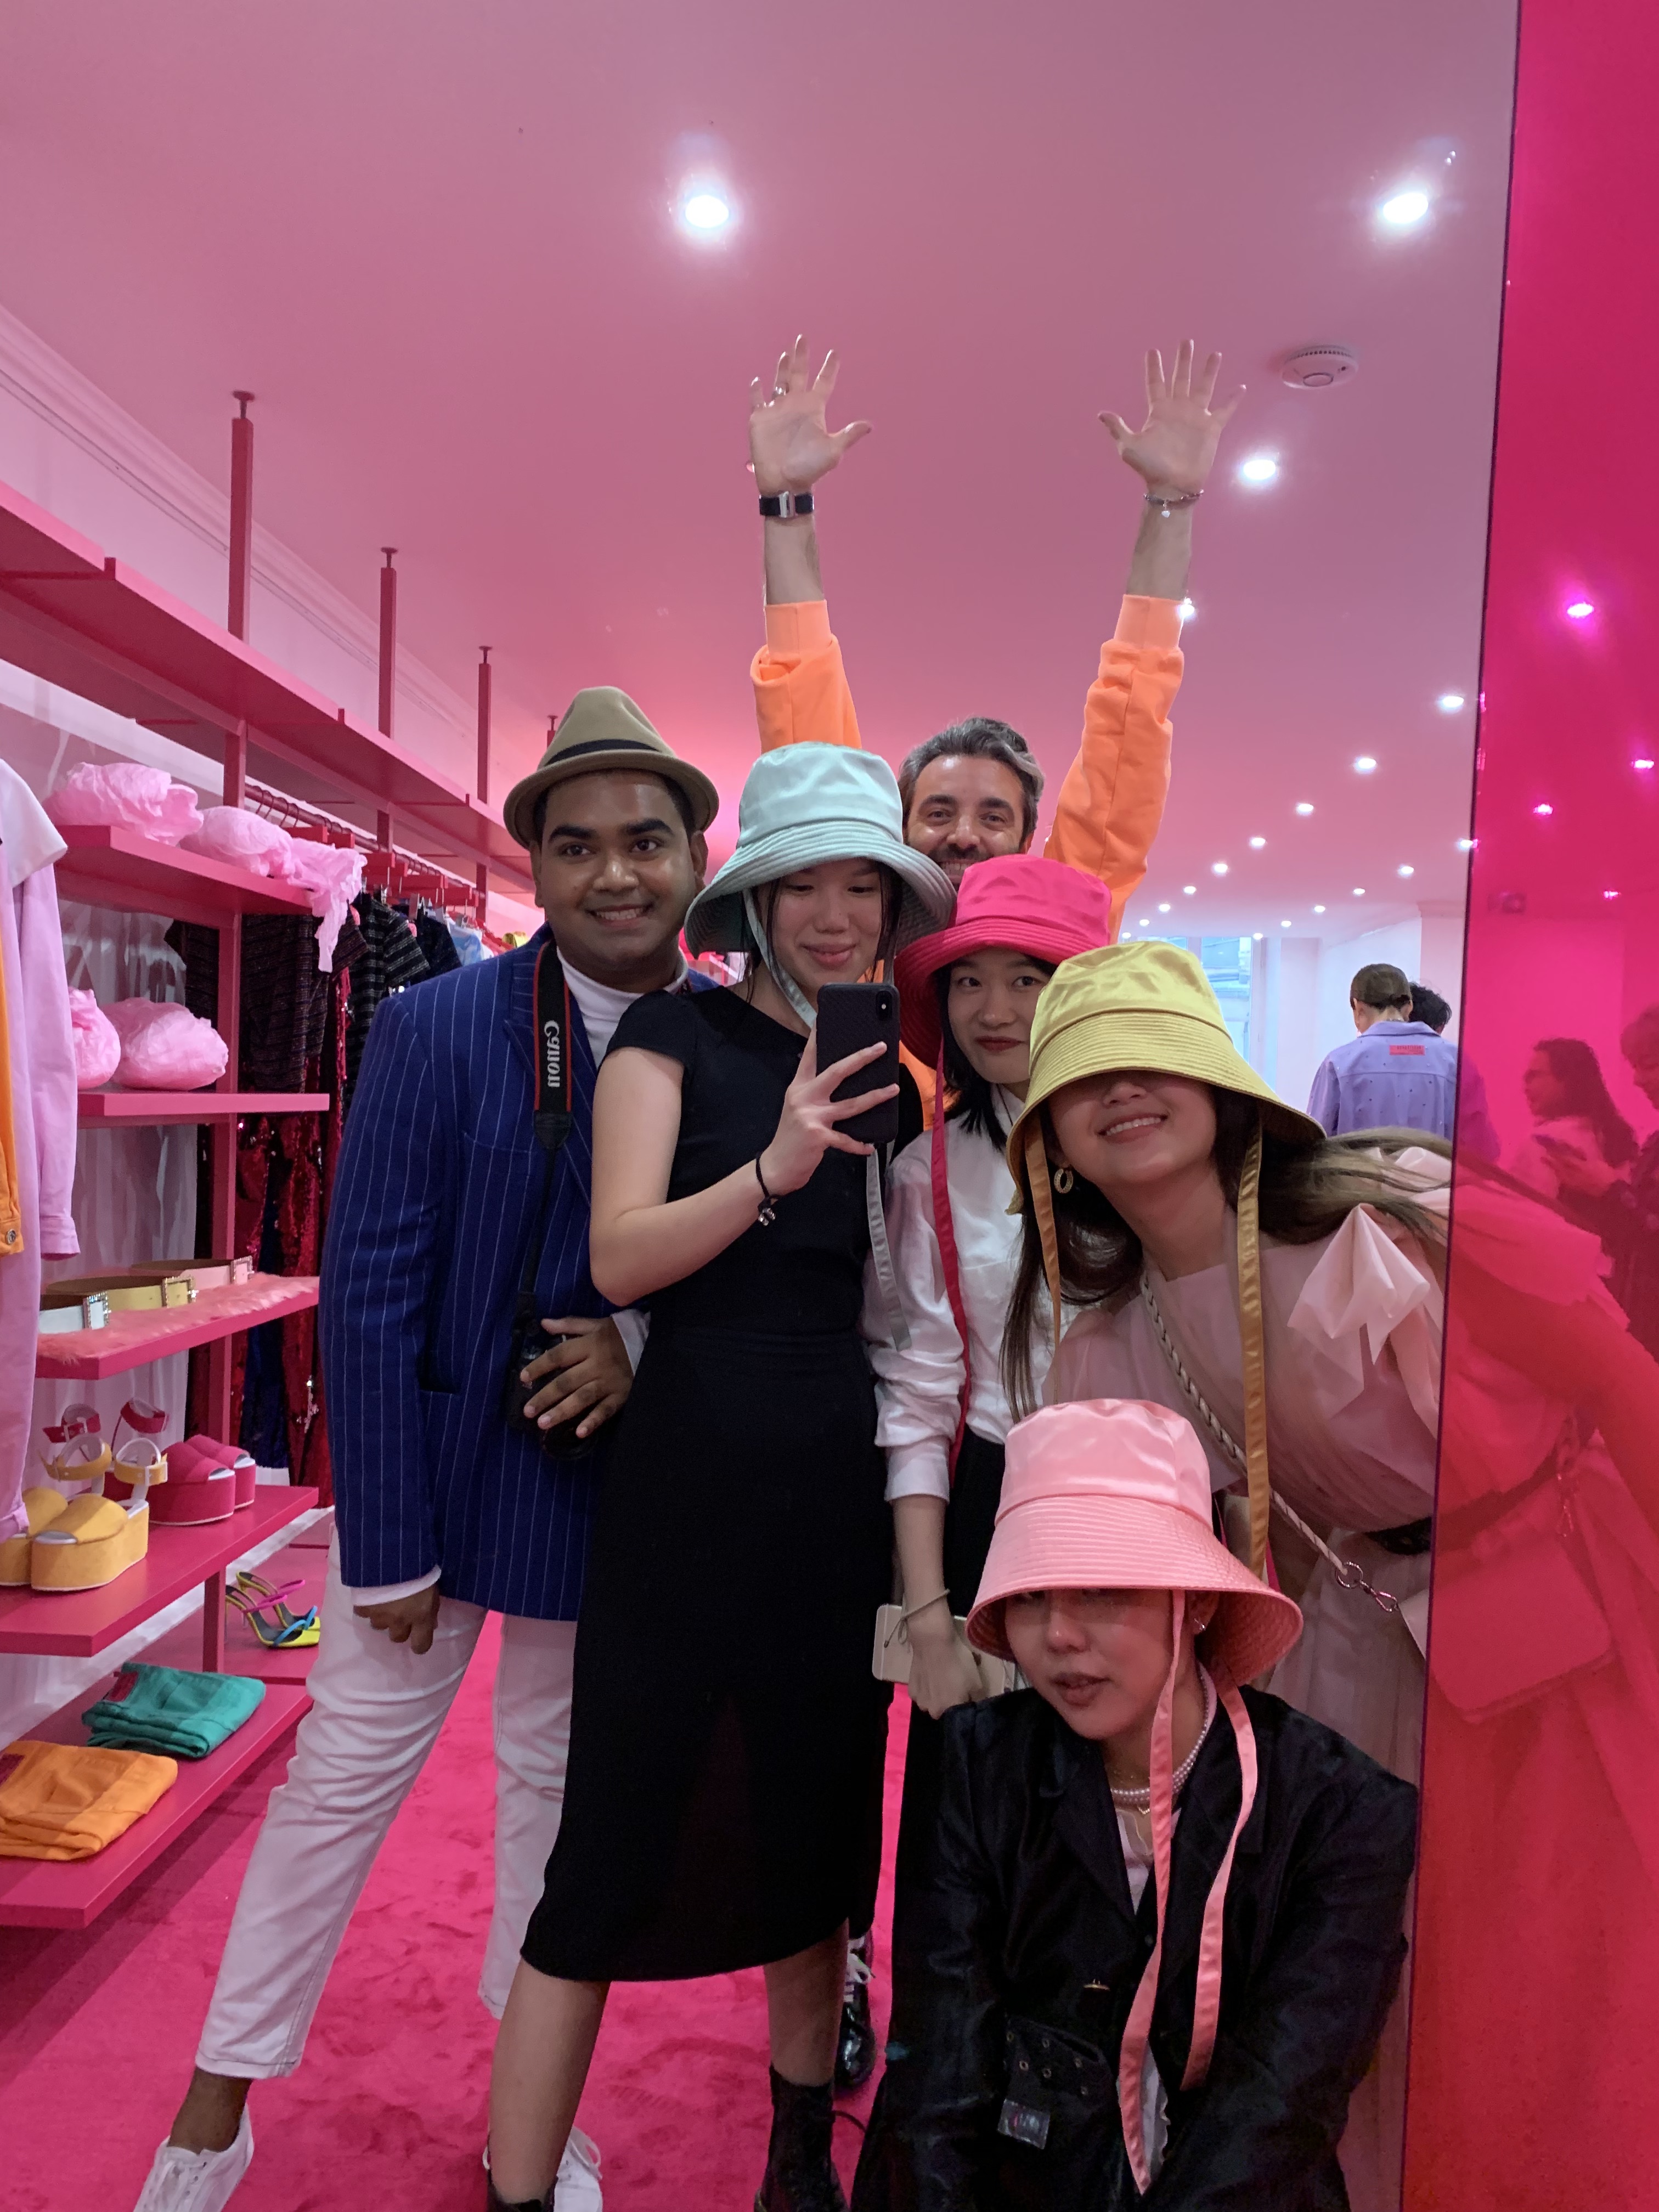 Bazaar-Academy-Navin-Pillay-Sarah-Lin-and-I-New-Gen-Finalists-Rena-Kok-and-Zoey-Zhao-at-the-IRENEISGOODLABEL-Showroom-with-a-team-member-photo-bombing-us.jpeg